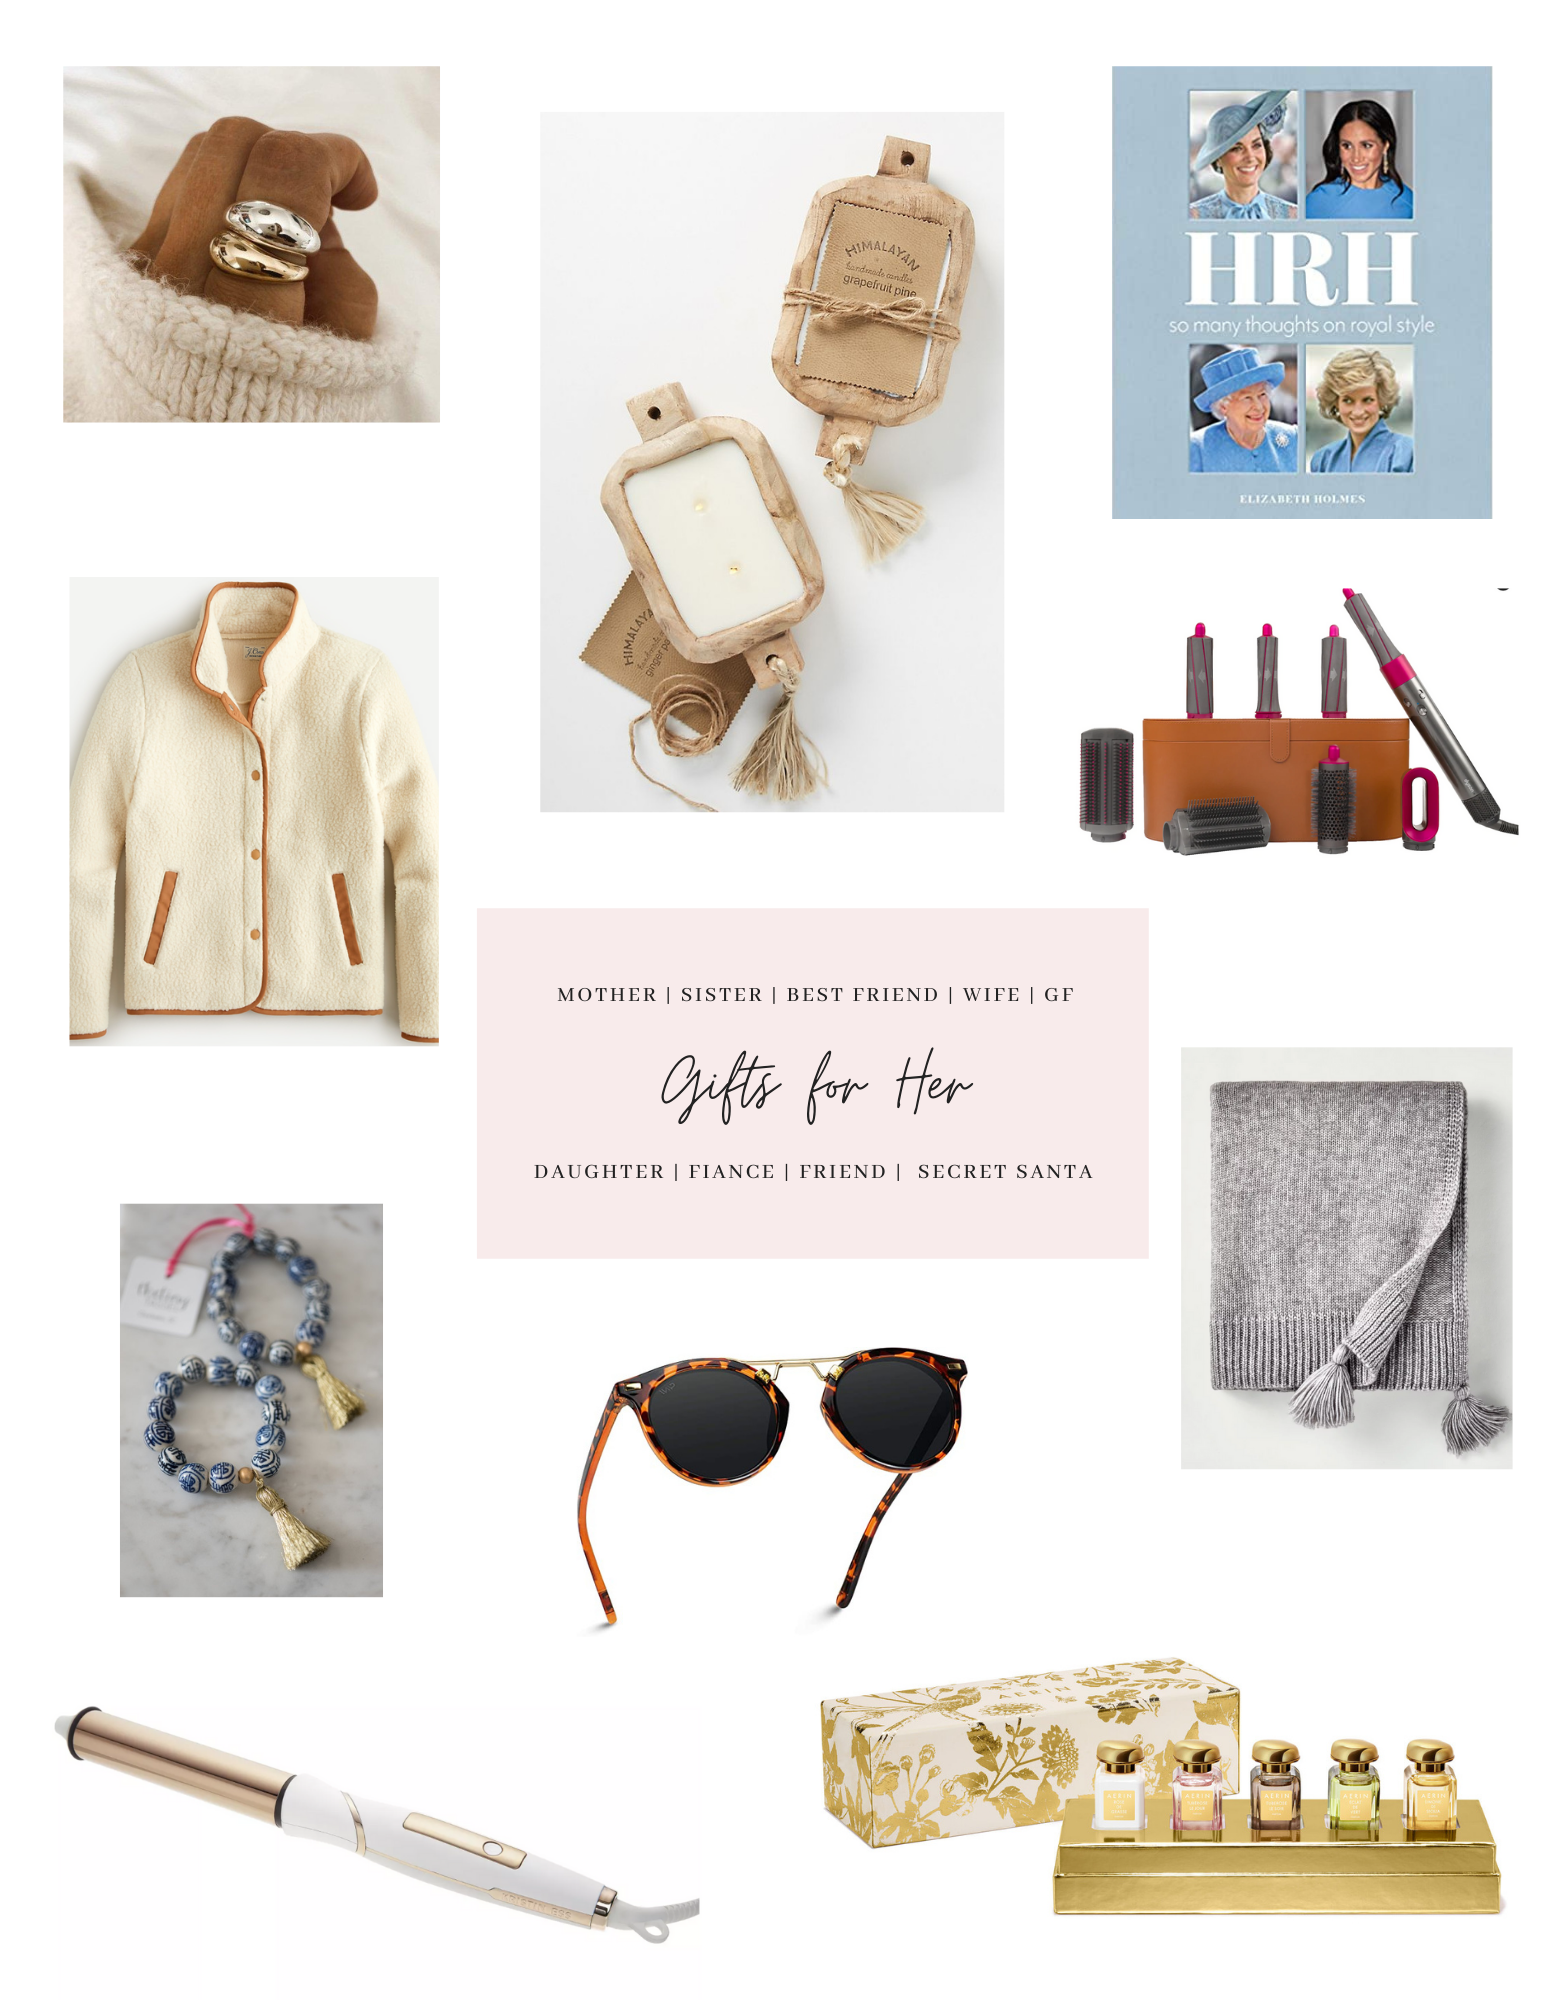 Gift Guide For Her (& Gifts Supporting Small, Local Biz!) - Hummusapien